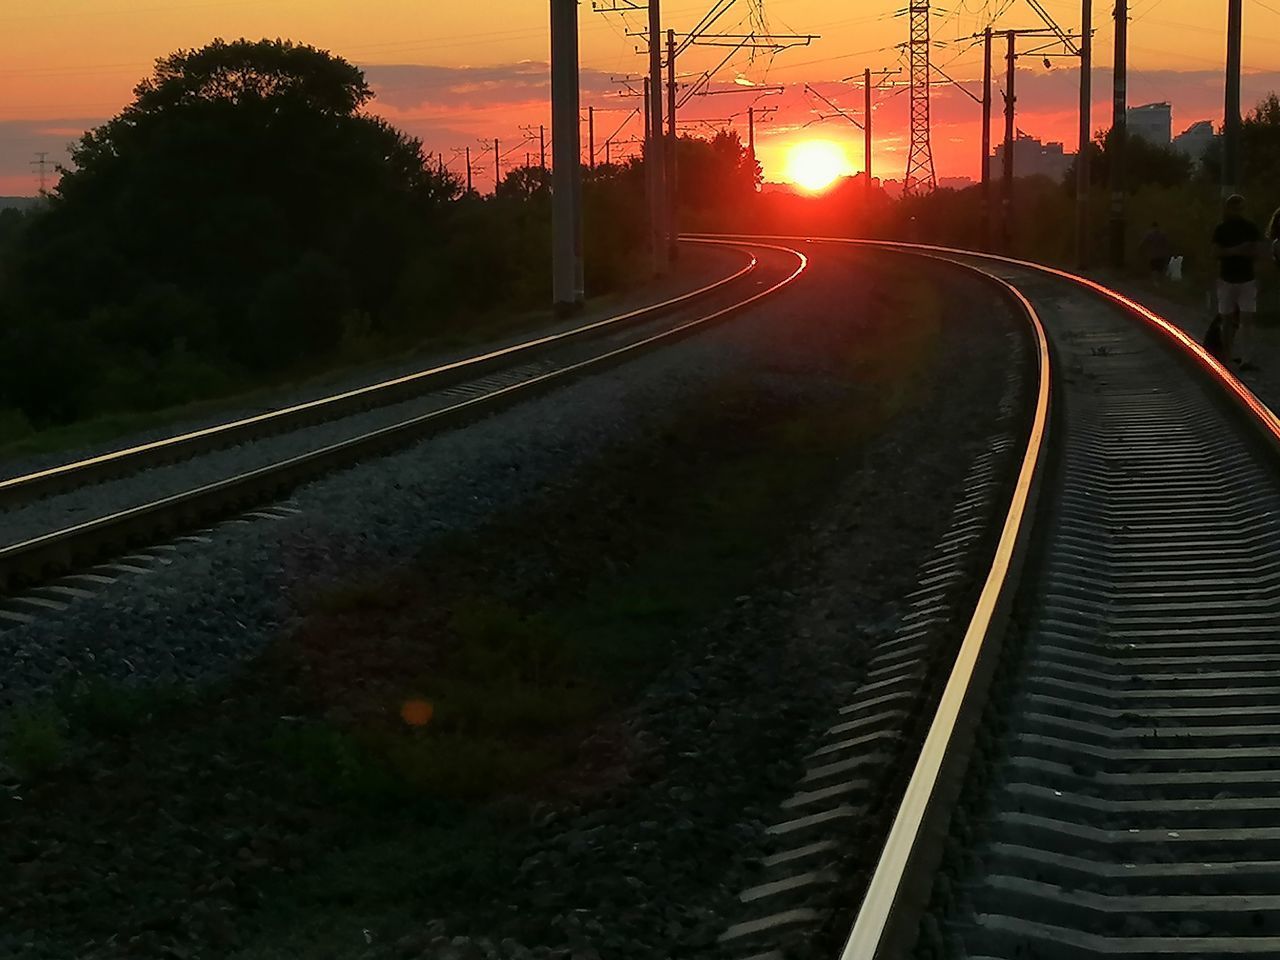 VIEW OF RAILROAD TRACKS DURING SUNSET